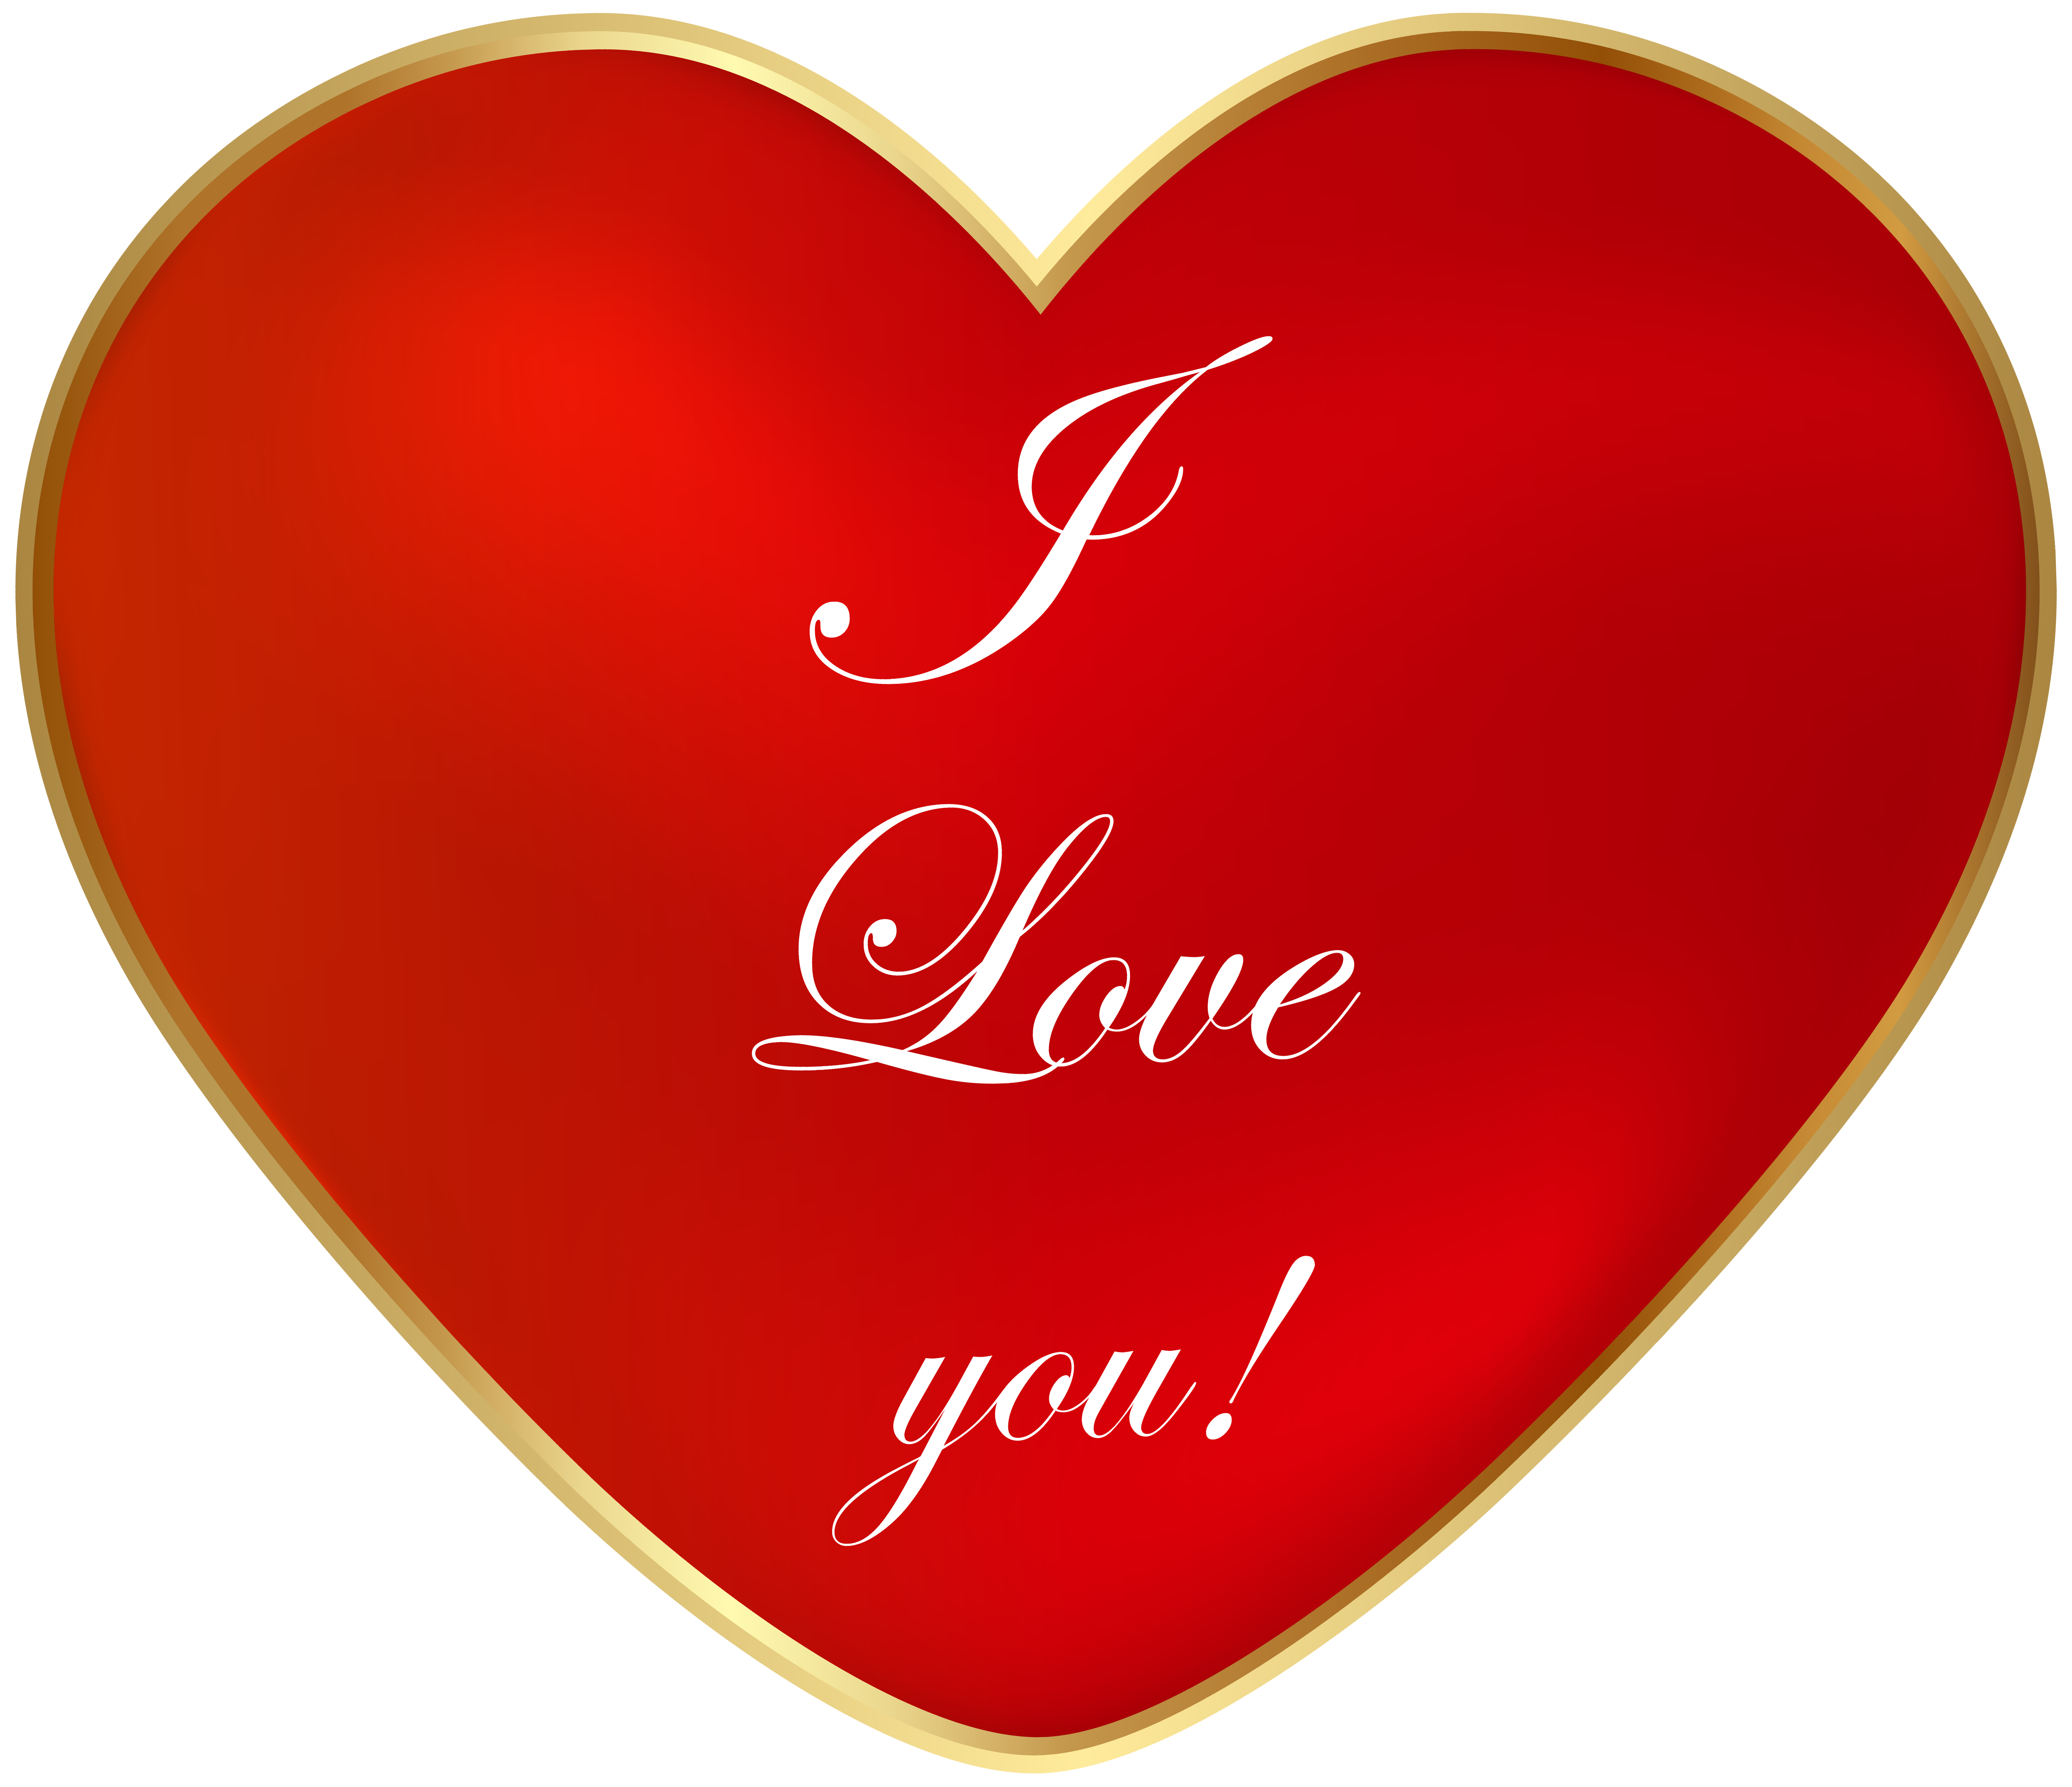 I Love You Heart Clip Art PNG Image | Gallery Yopriceville - High ...